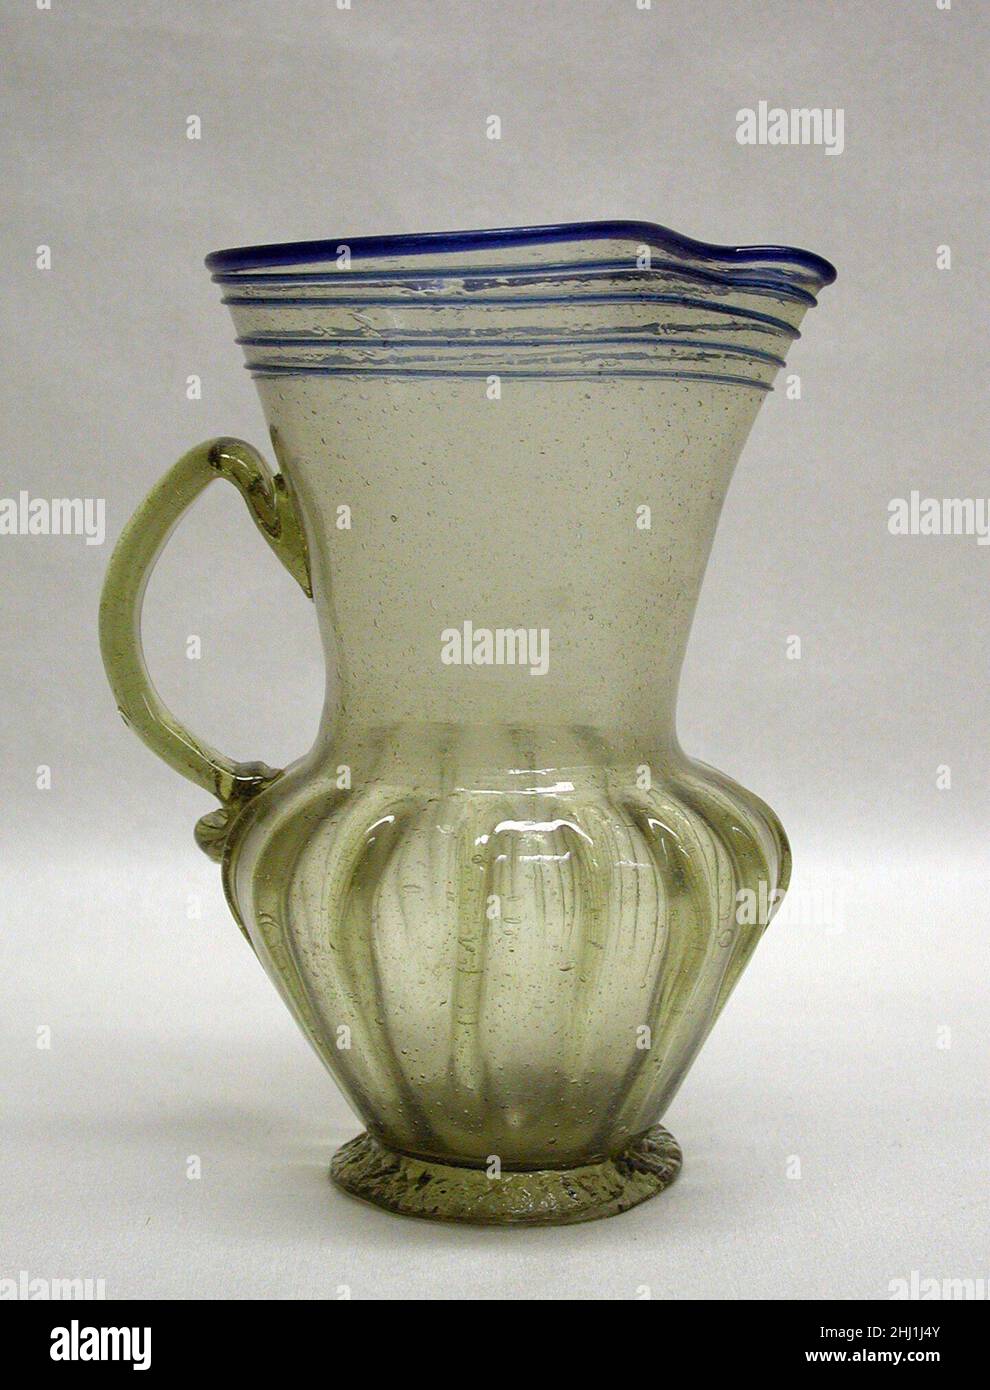 Carafe 17th Century Spanish, Grenade.Verseuse 186305 Banque D'Images